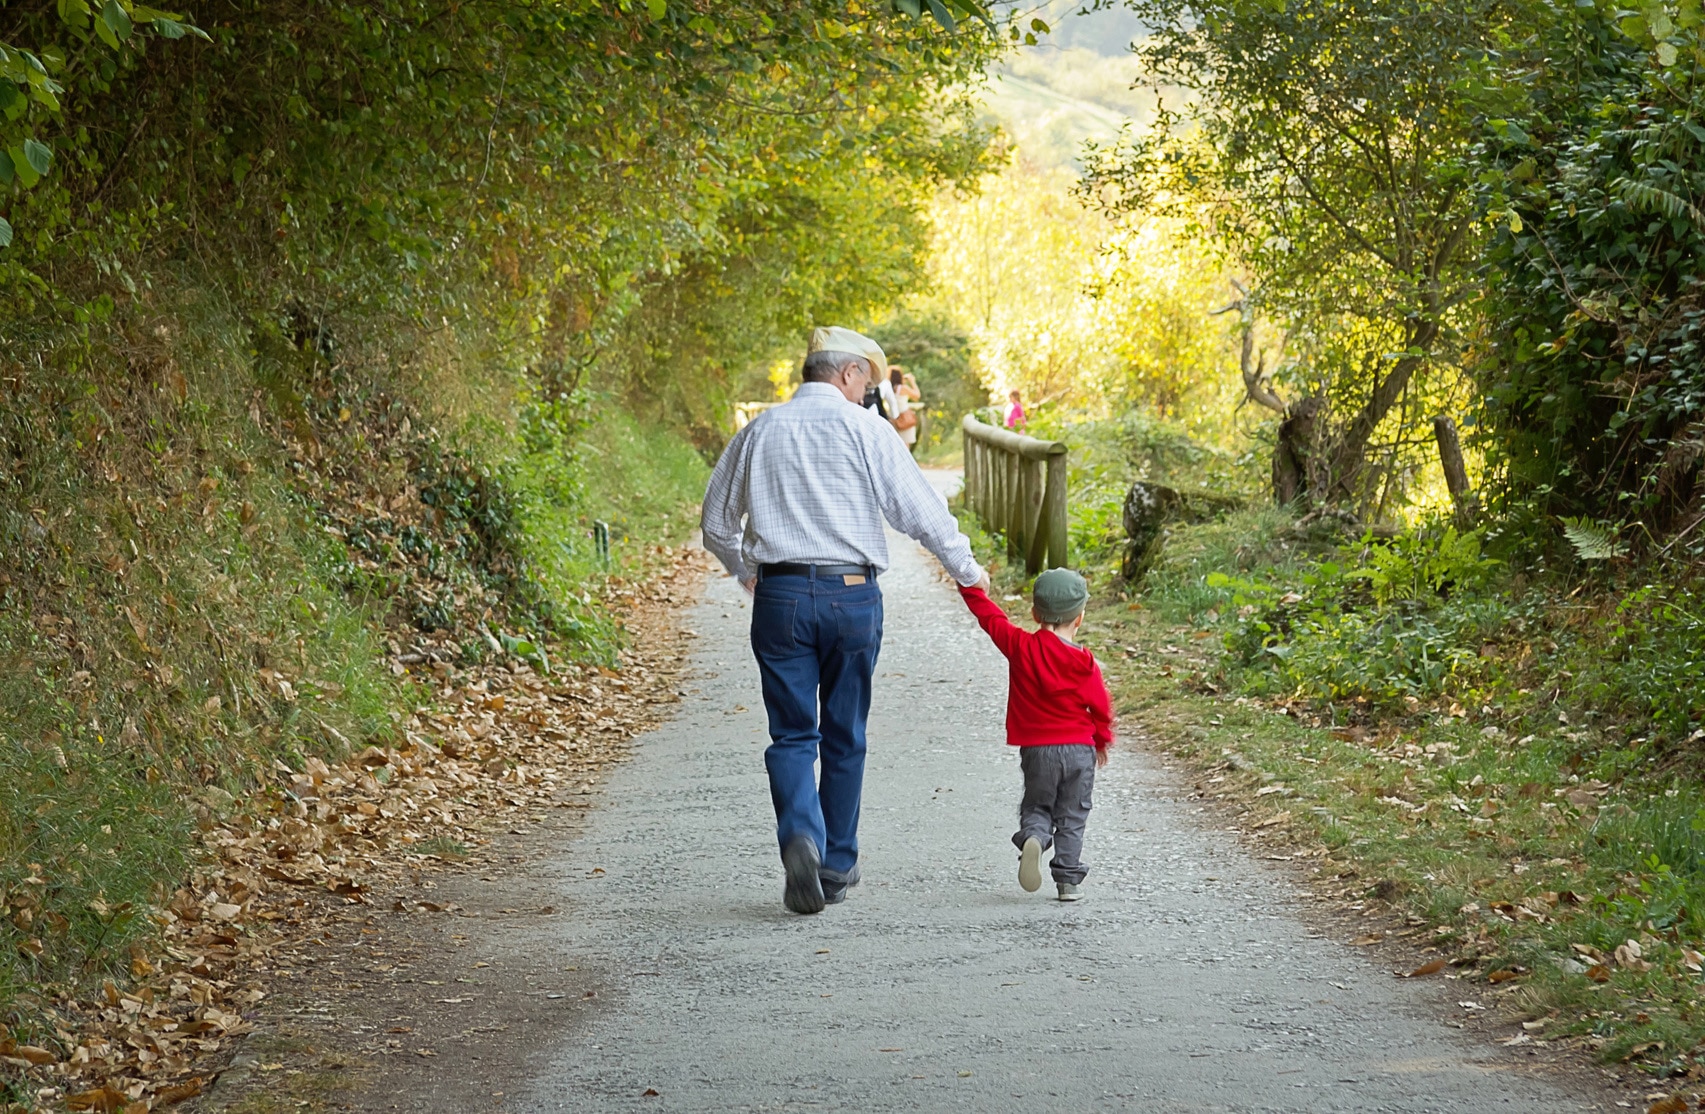 Grandfather walking hand in hand with young boy.